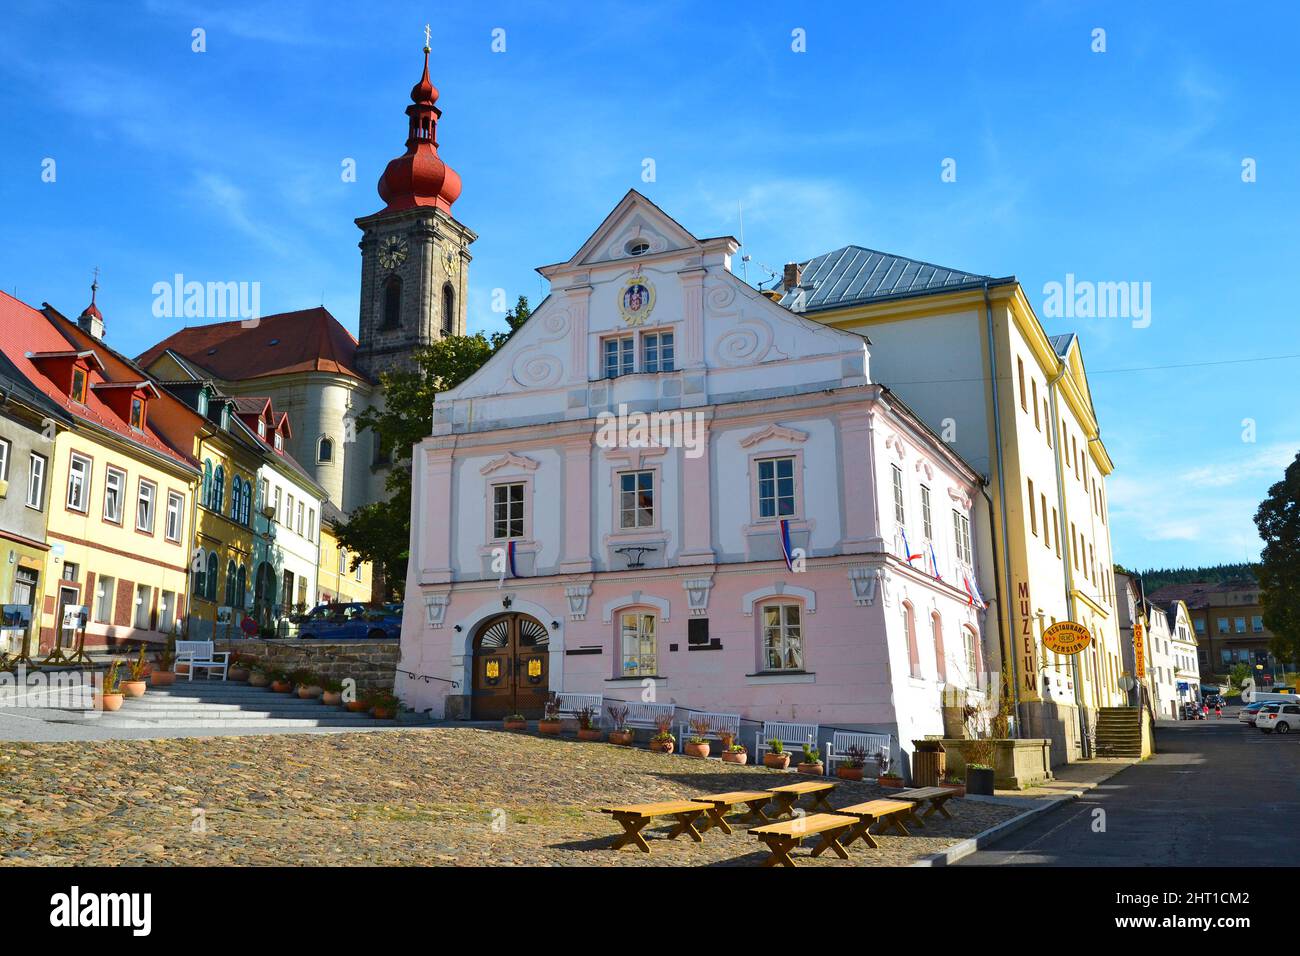 Becov nad Teplou, Czech Republic - August 12, 2018: Old baroque town hall on the square in Becov nad Teplou near the spa town of Karlovy Vary, Czech R Stock Photo